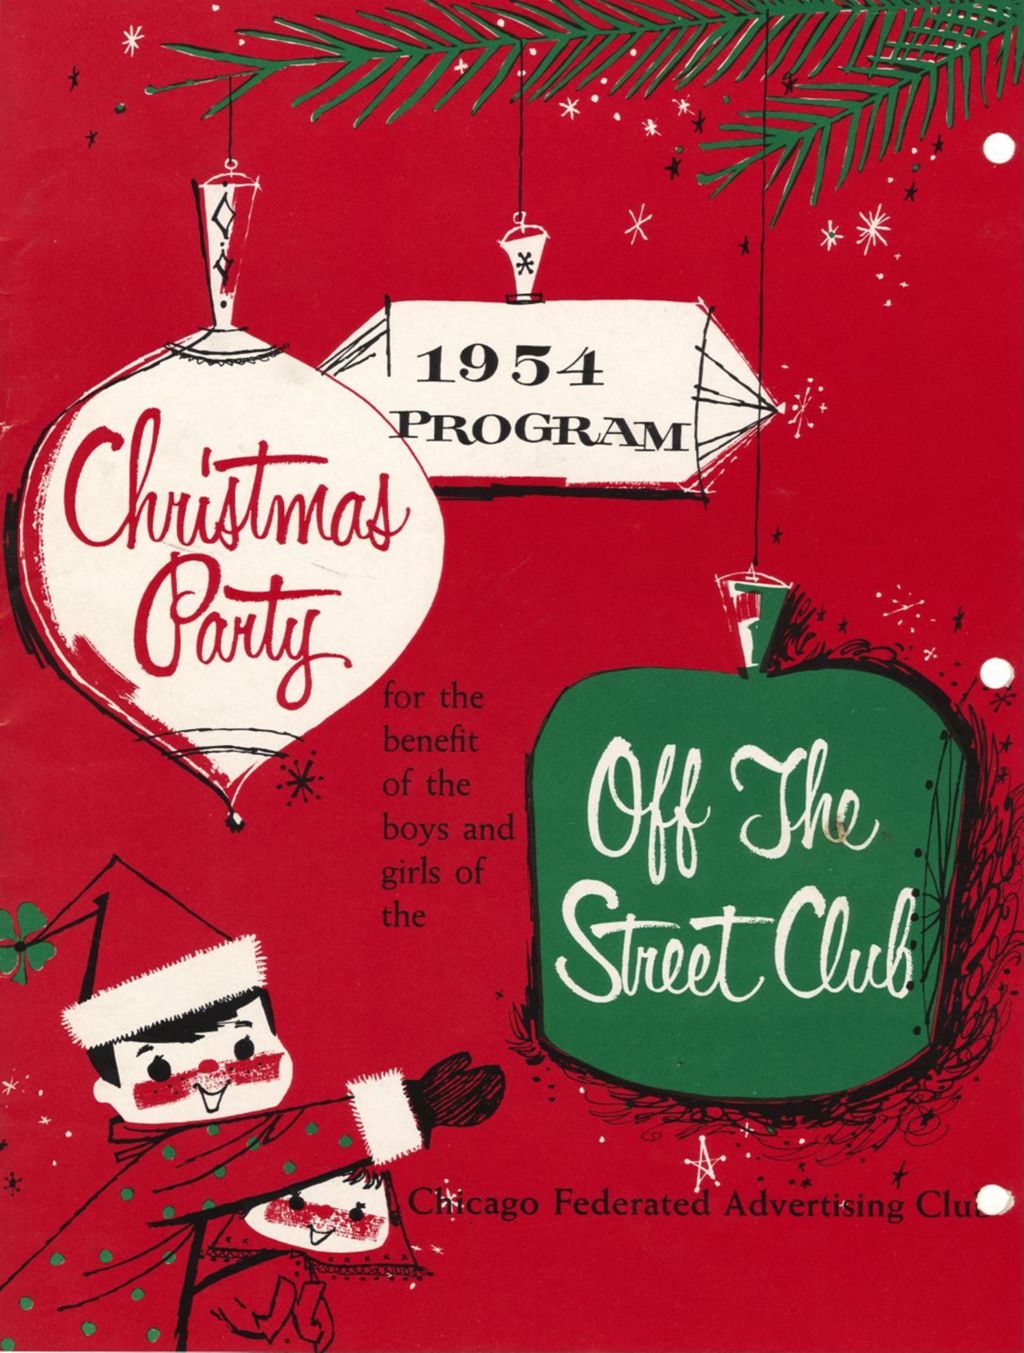 Christmas Party Benefit program for Off-The-Street Club